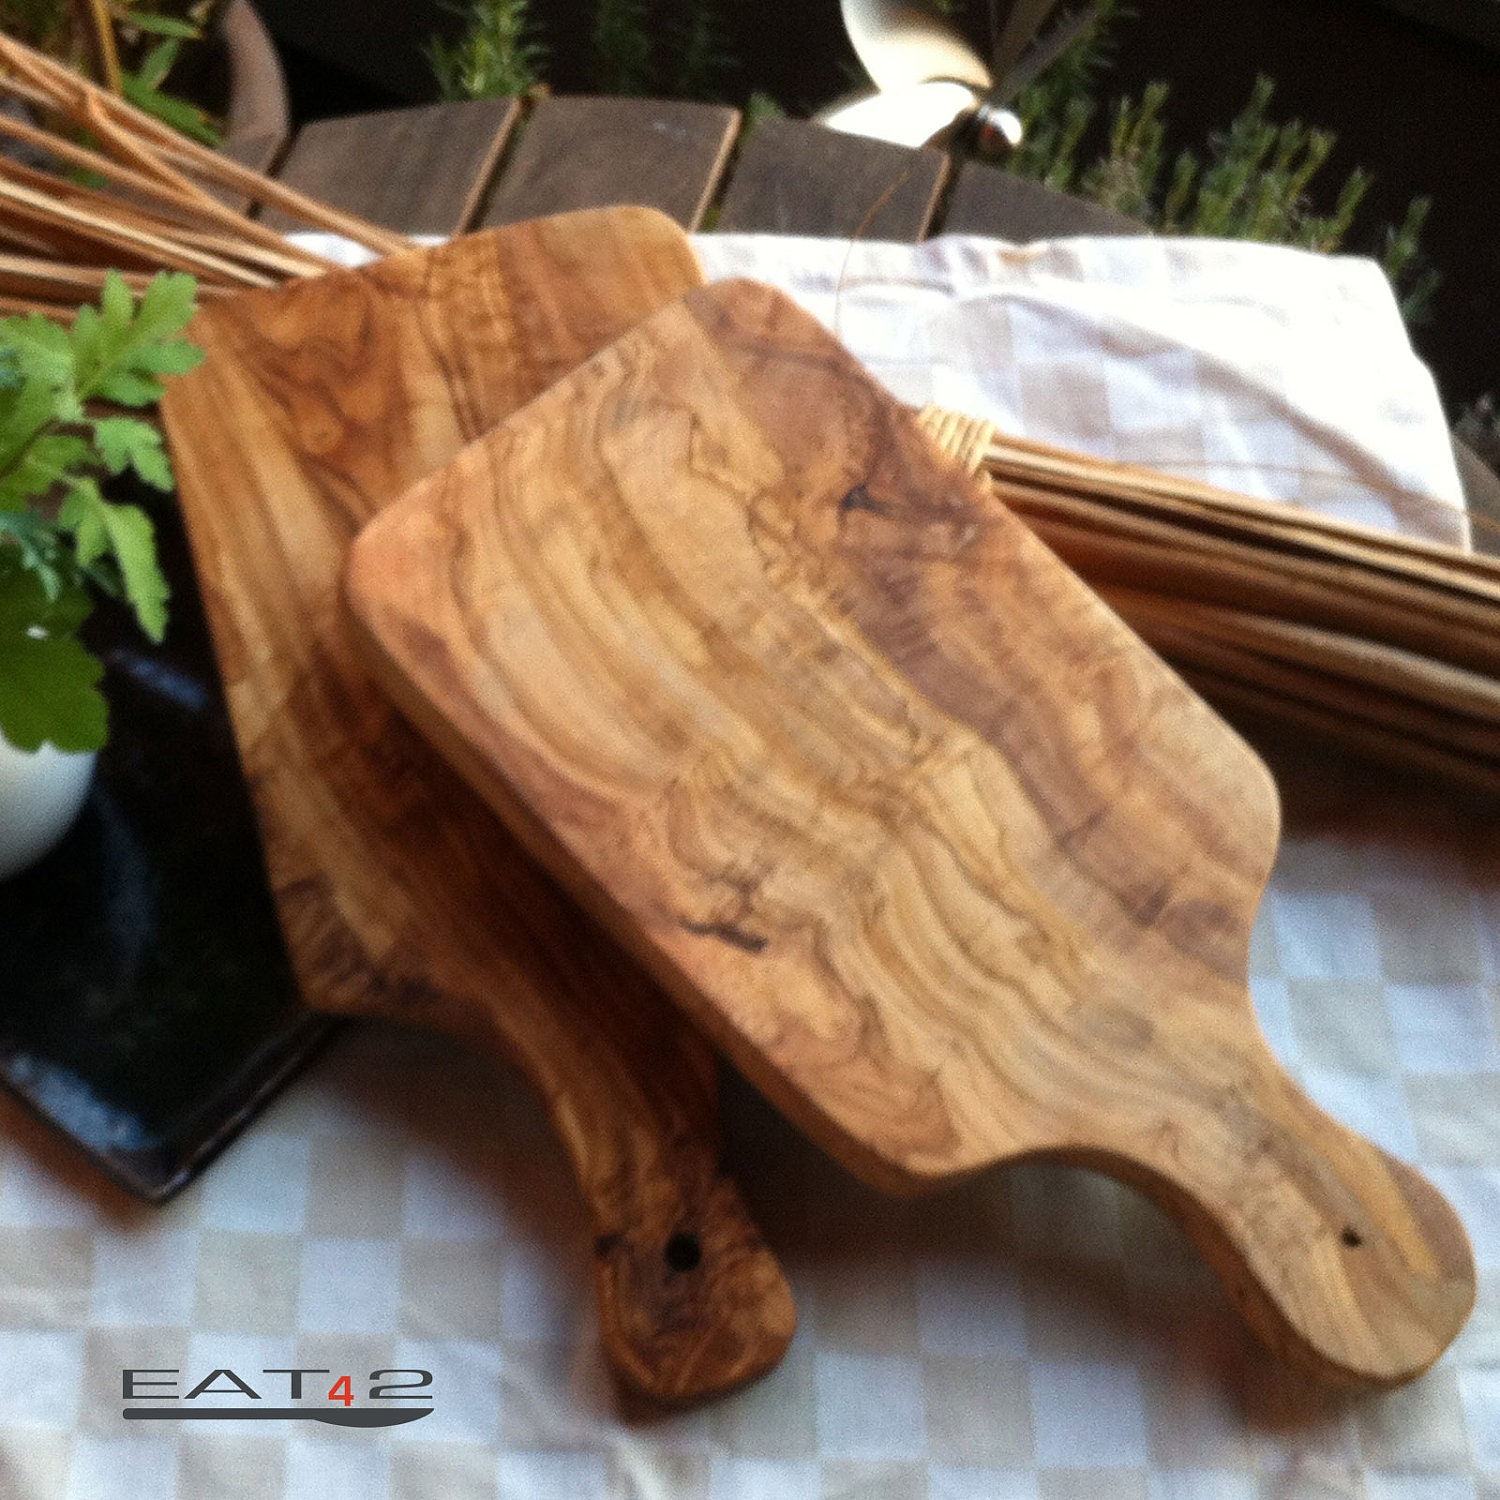 Olive Wood Cutting Board - Wooden Cutting Boards -  Chopping board rectangular with handle (two pieces) - Premiumolivewood